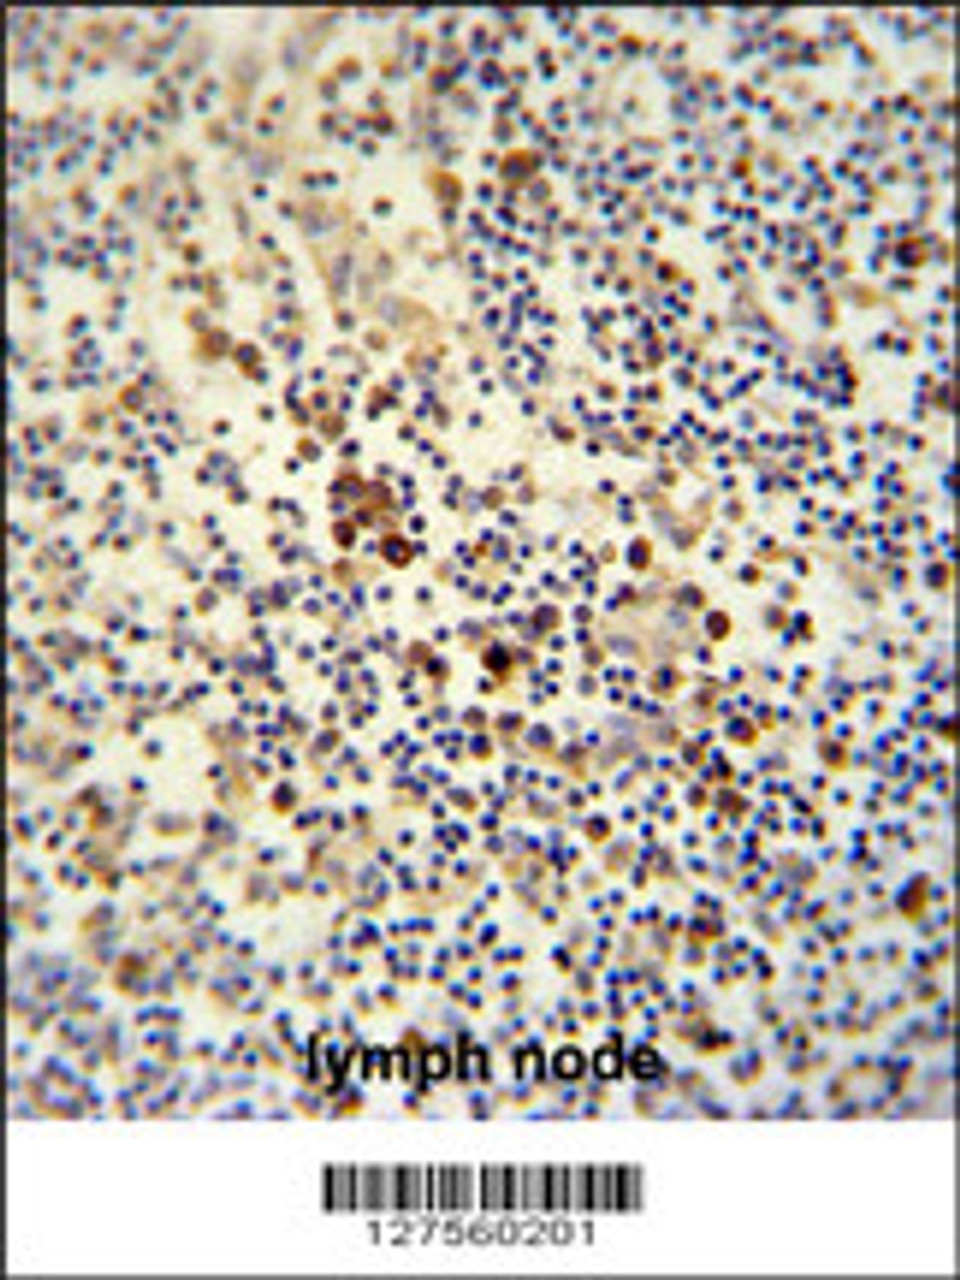 LY6G6C antibody immunohistochemistry analysis in formalin fixed and paraffin embedded human lymph node followed by peroxidase conjugation of the secondary antibody and DAB staining.